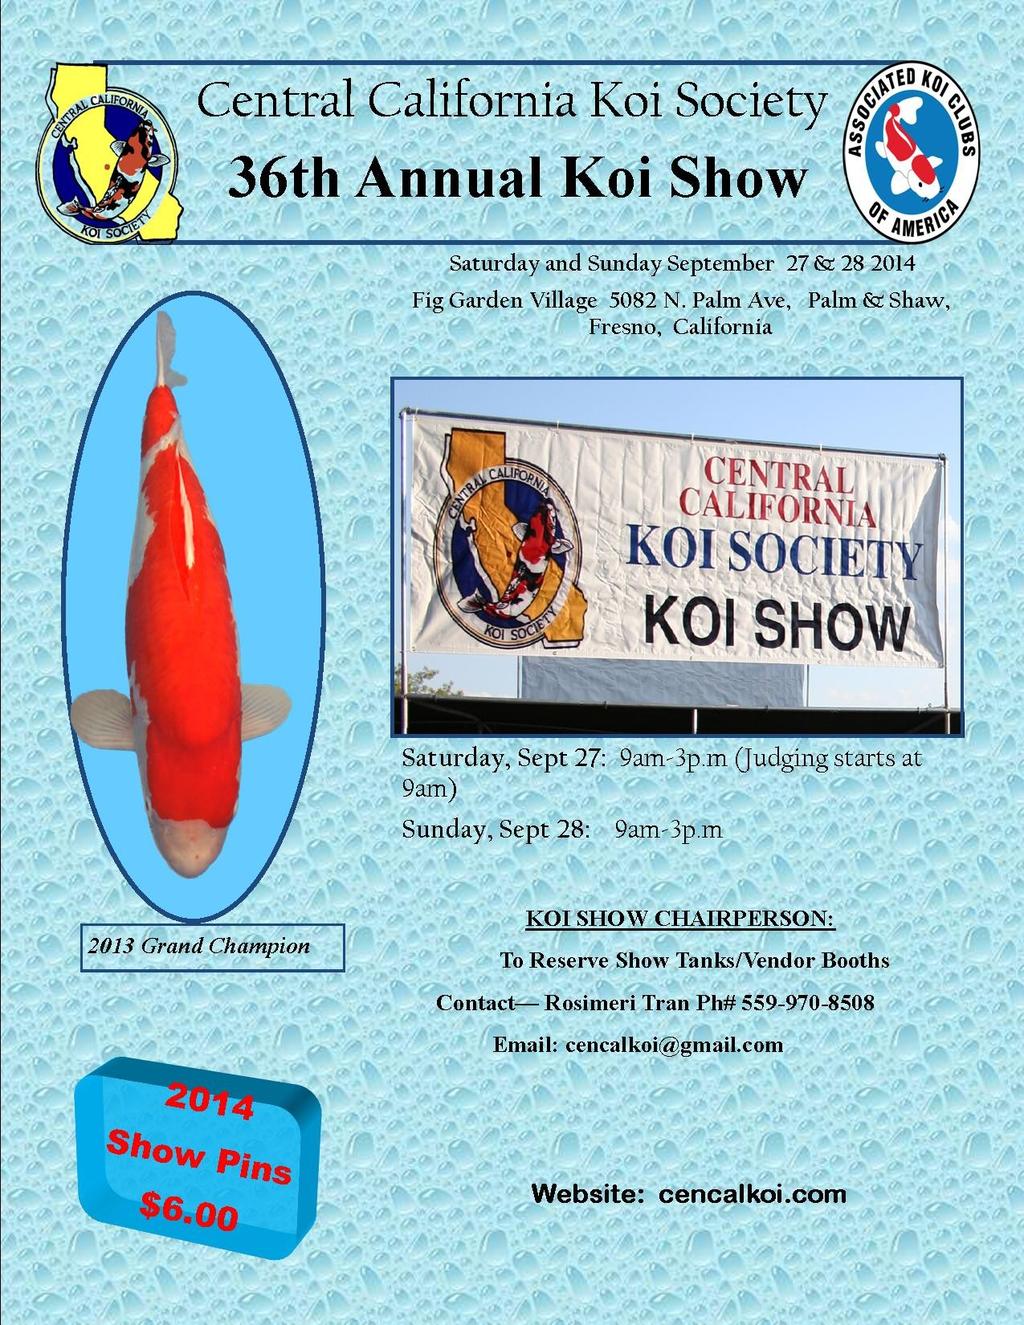 Central California Koi Society Koi Show Our September koi show is not far away, if you are interested in showing koi or as a vendor please contact at 559-970- 8508 or email at cencalkoi@gmail.com.